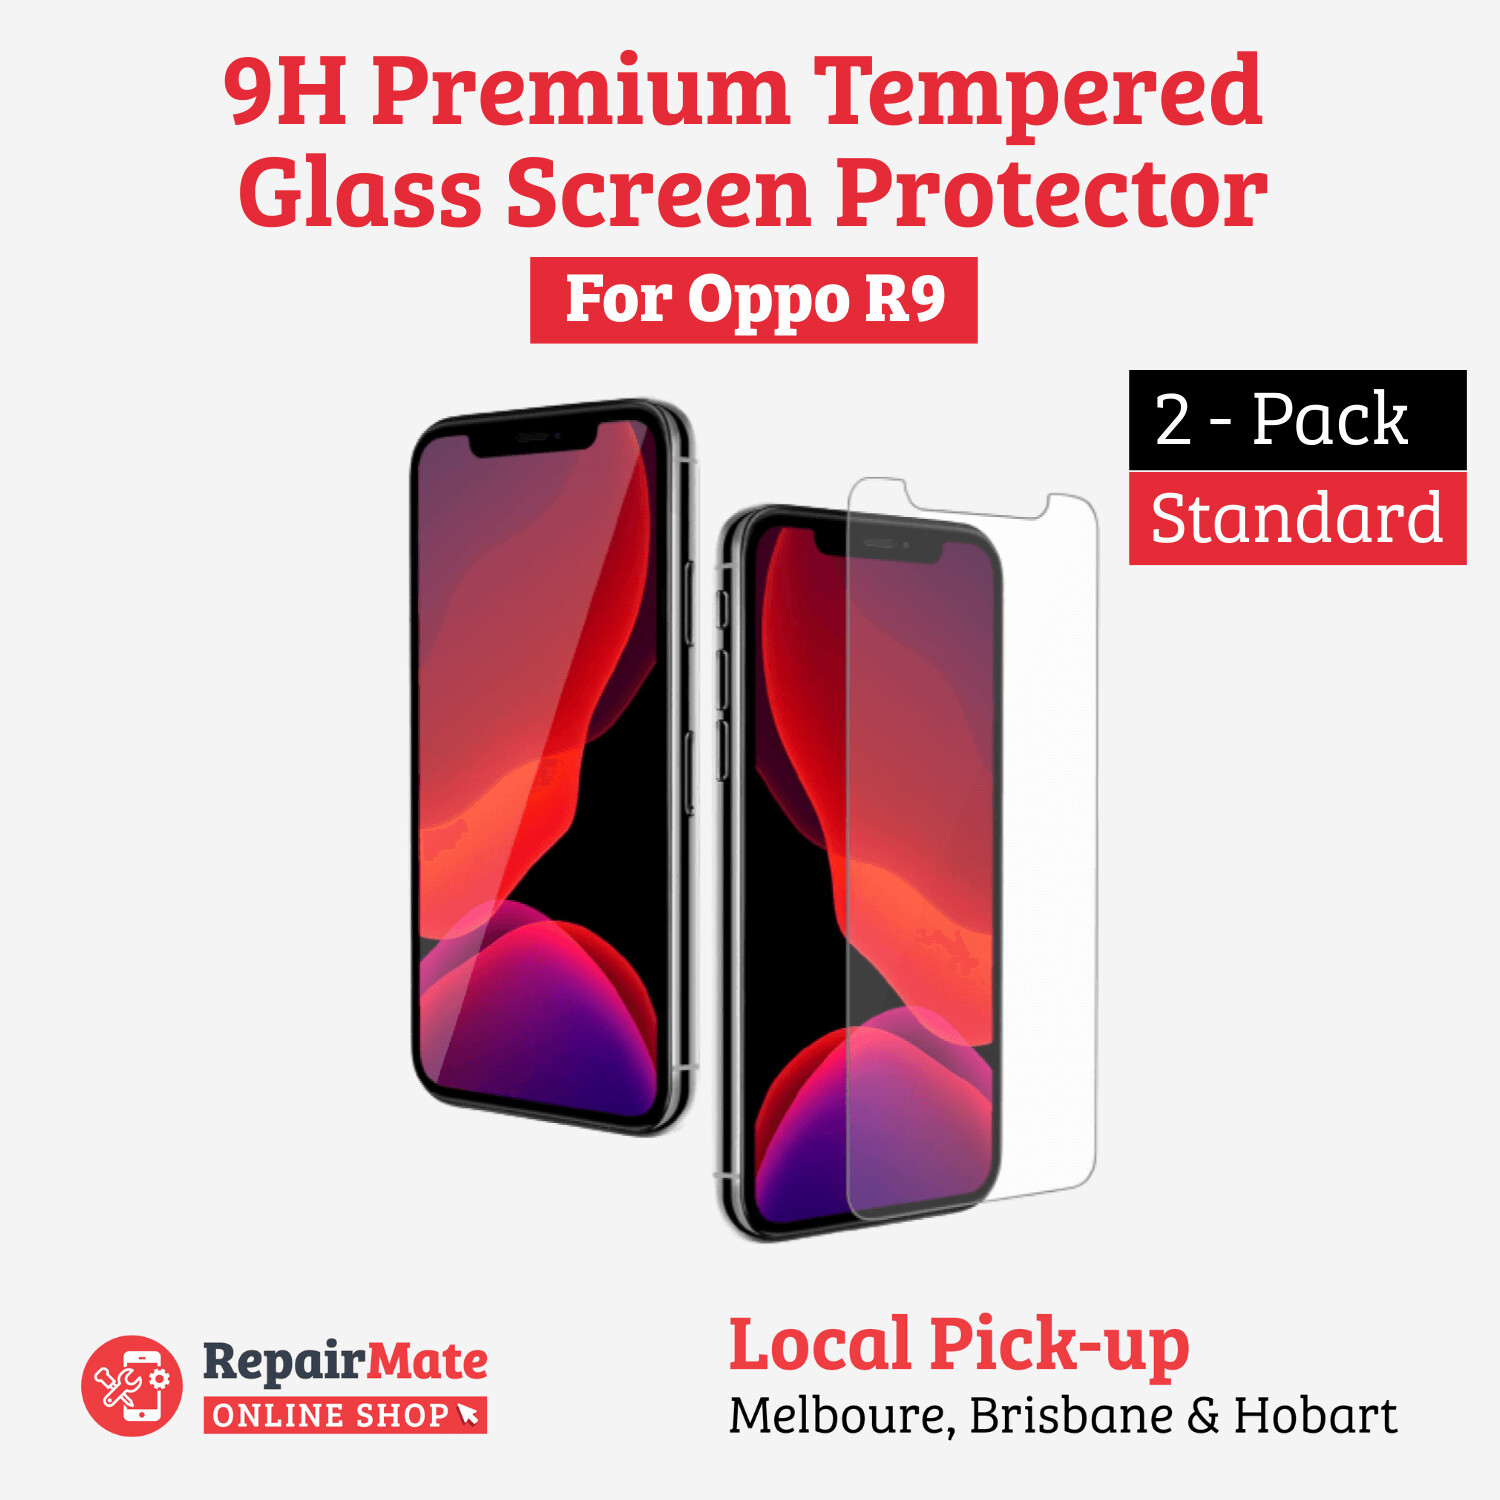 Oppo R9 9H Premium Tempered Glass Screen Protector [2 Pack]